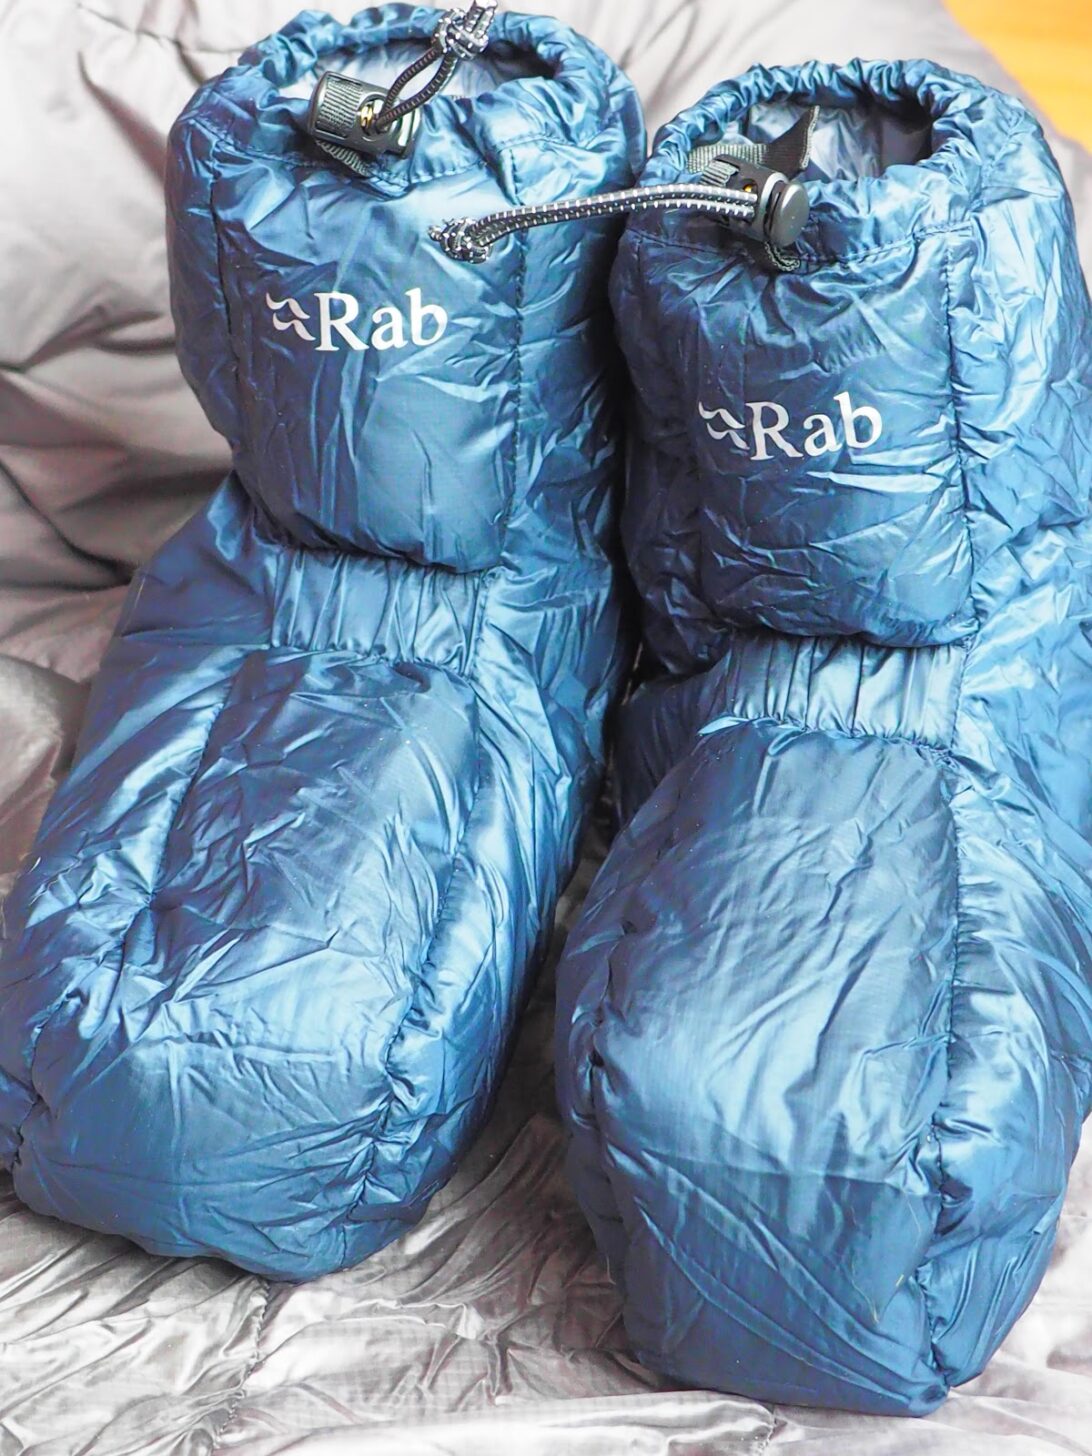 A shot of the Rab Expedition Slippers that allow you to see the elastic panels and well-tailored fit.